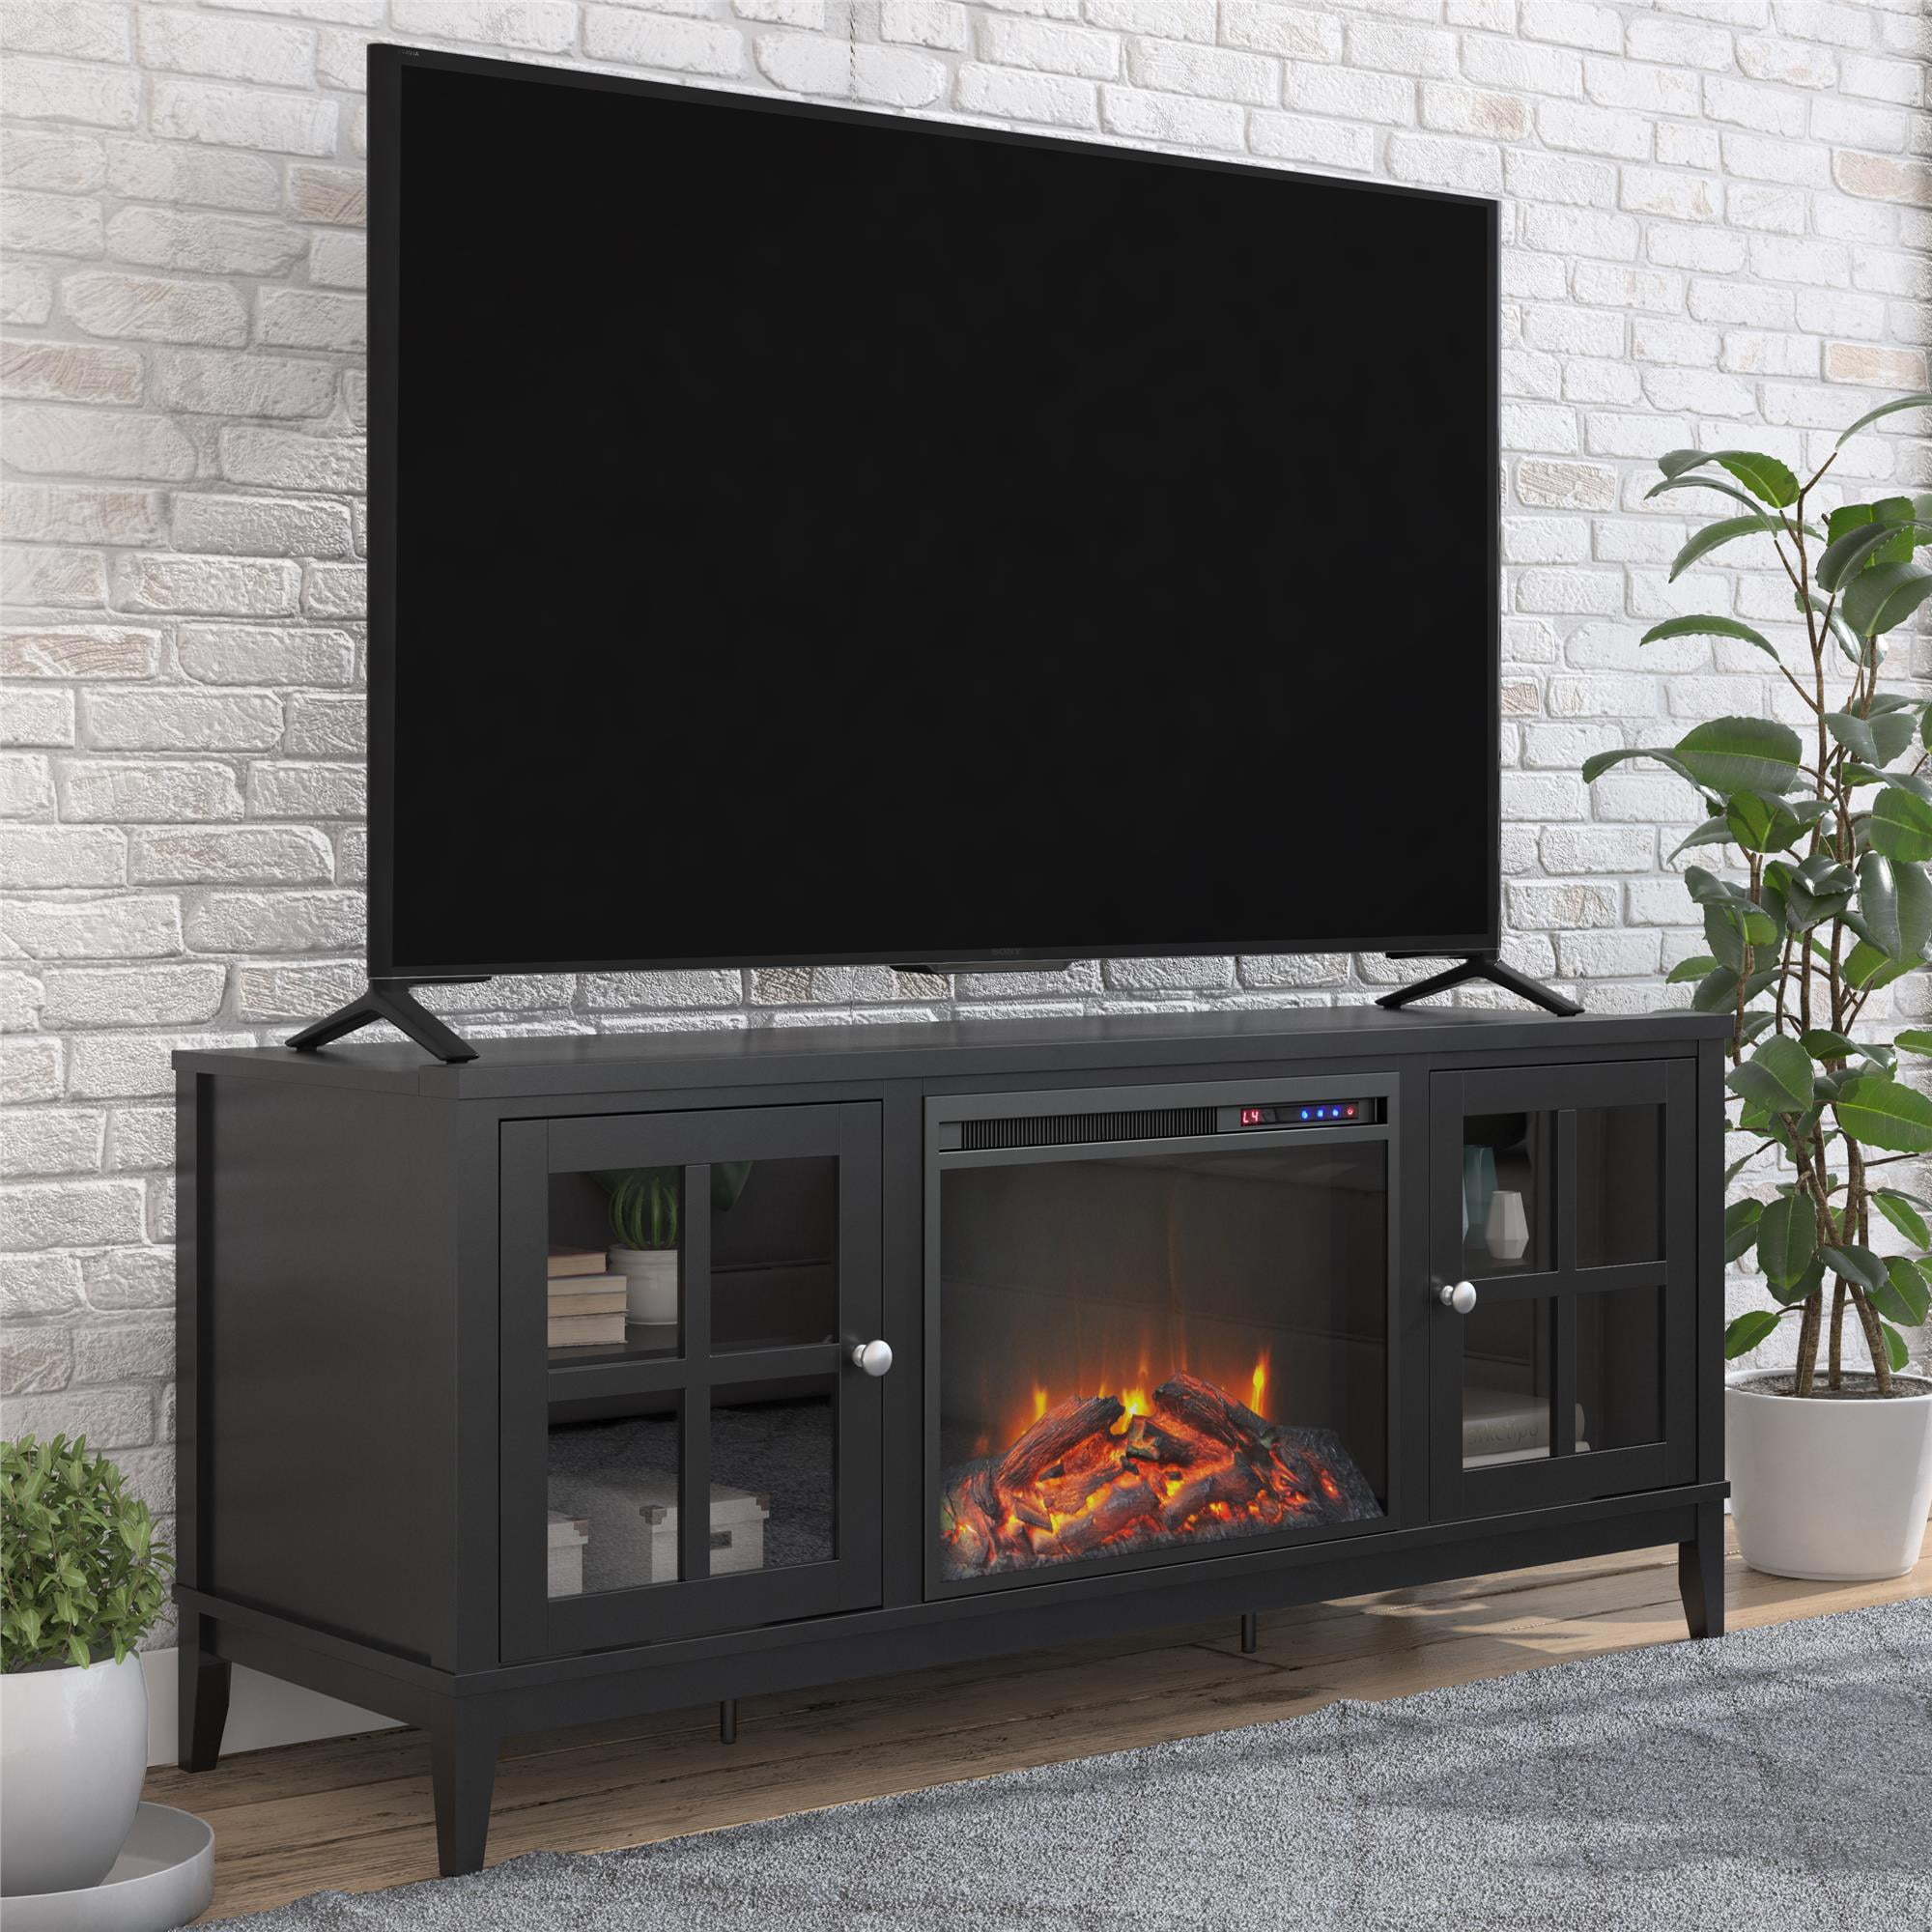 Ameriwood Home Franklin Fireplace TV Stand for TVs up to ...